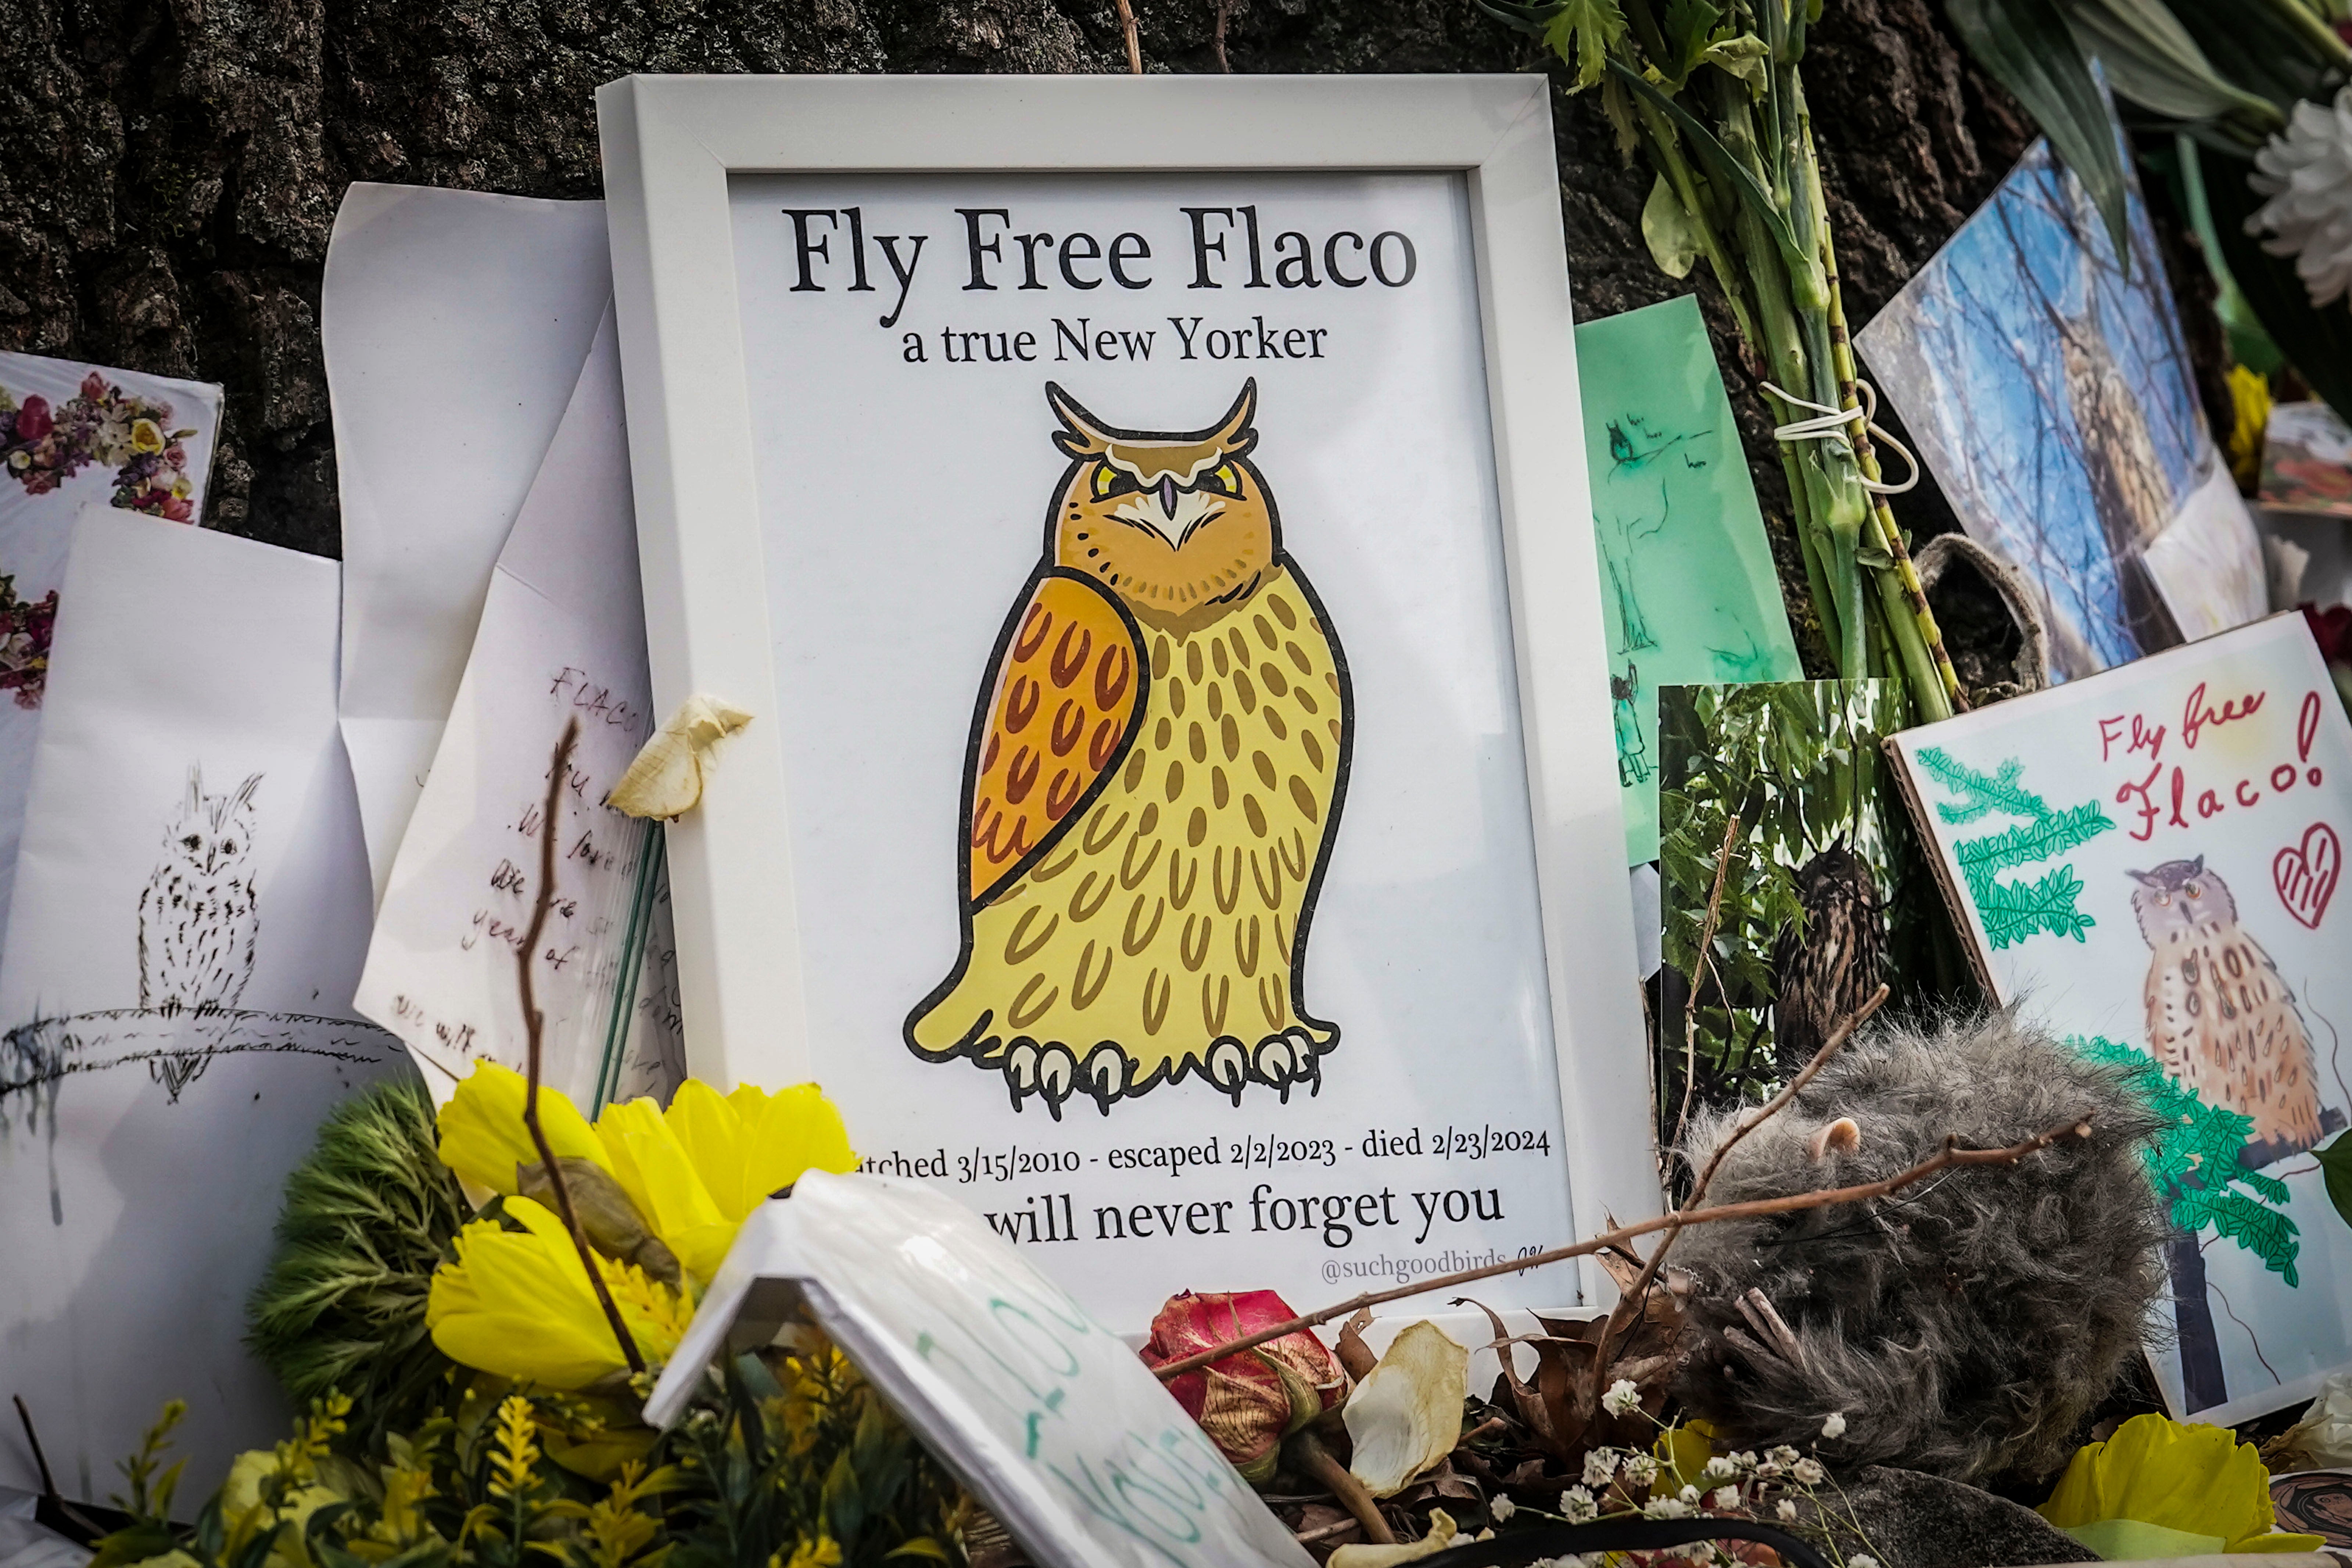 Tributes surround the base of an oak tree in a Central Park makeshift memorial for Flaco